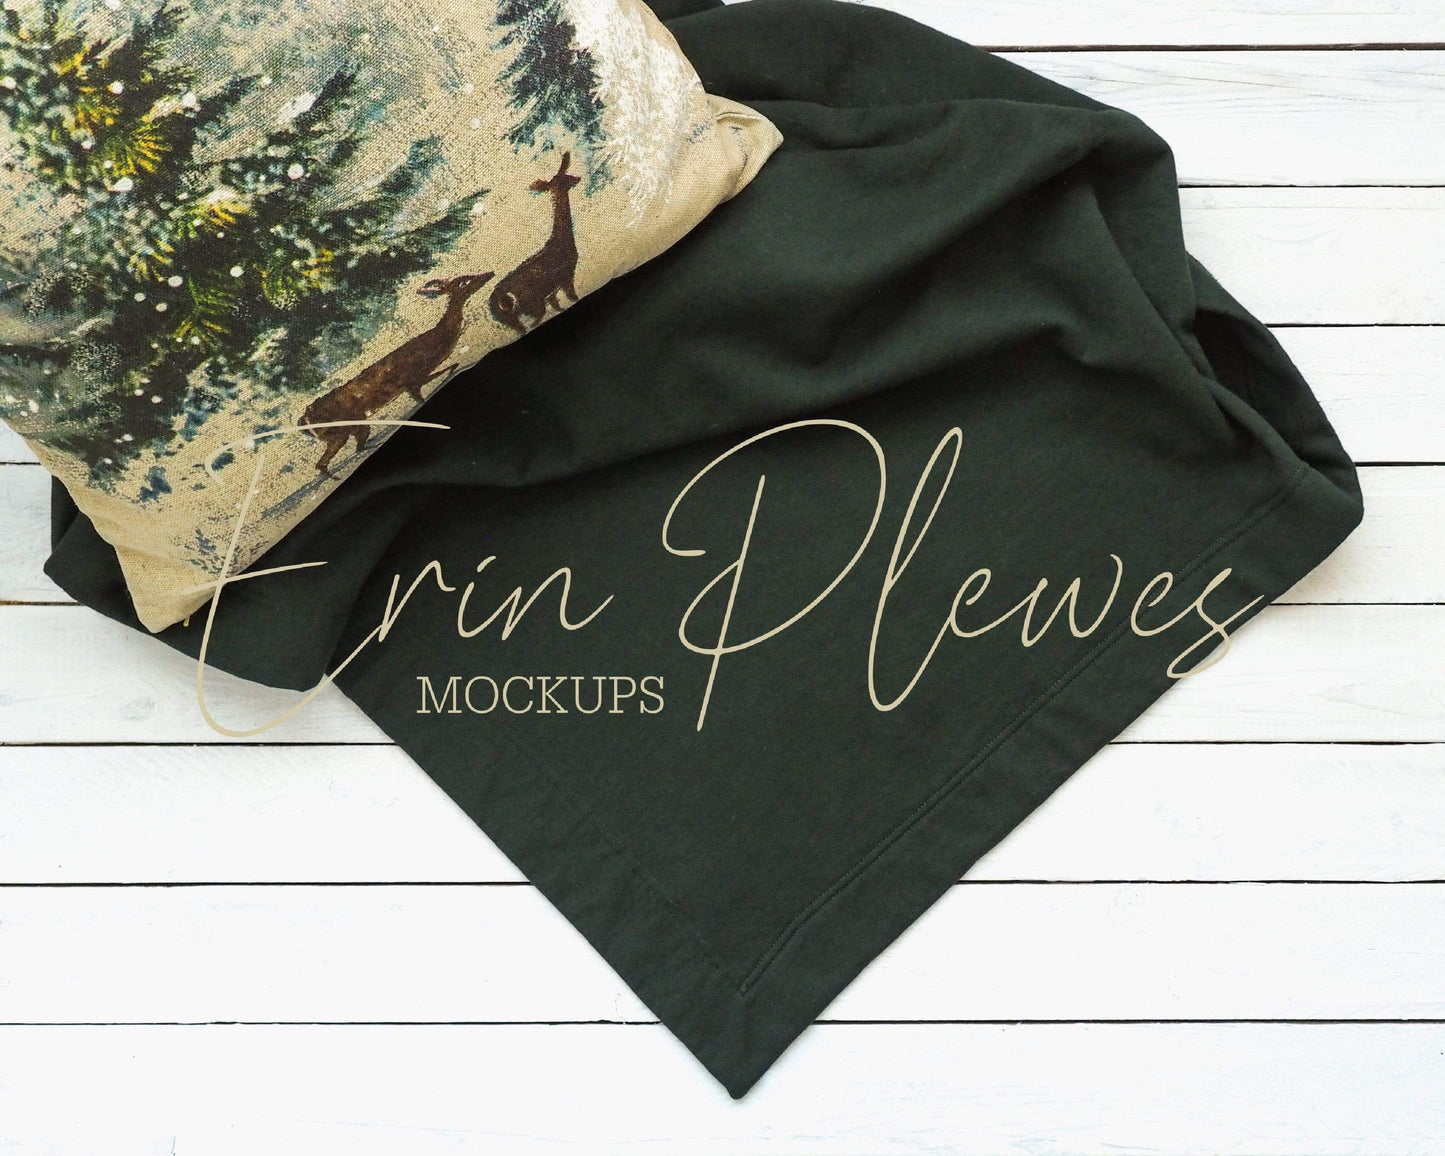 Erin Plewes Mockups Blanket Mockup Green, Christmas Blanket Mock Up, Gildan Sweatshirt Blanket Mock-up, Styled Stock Photo Template